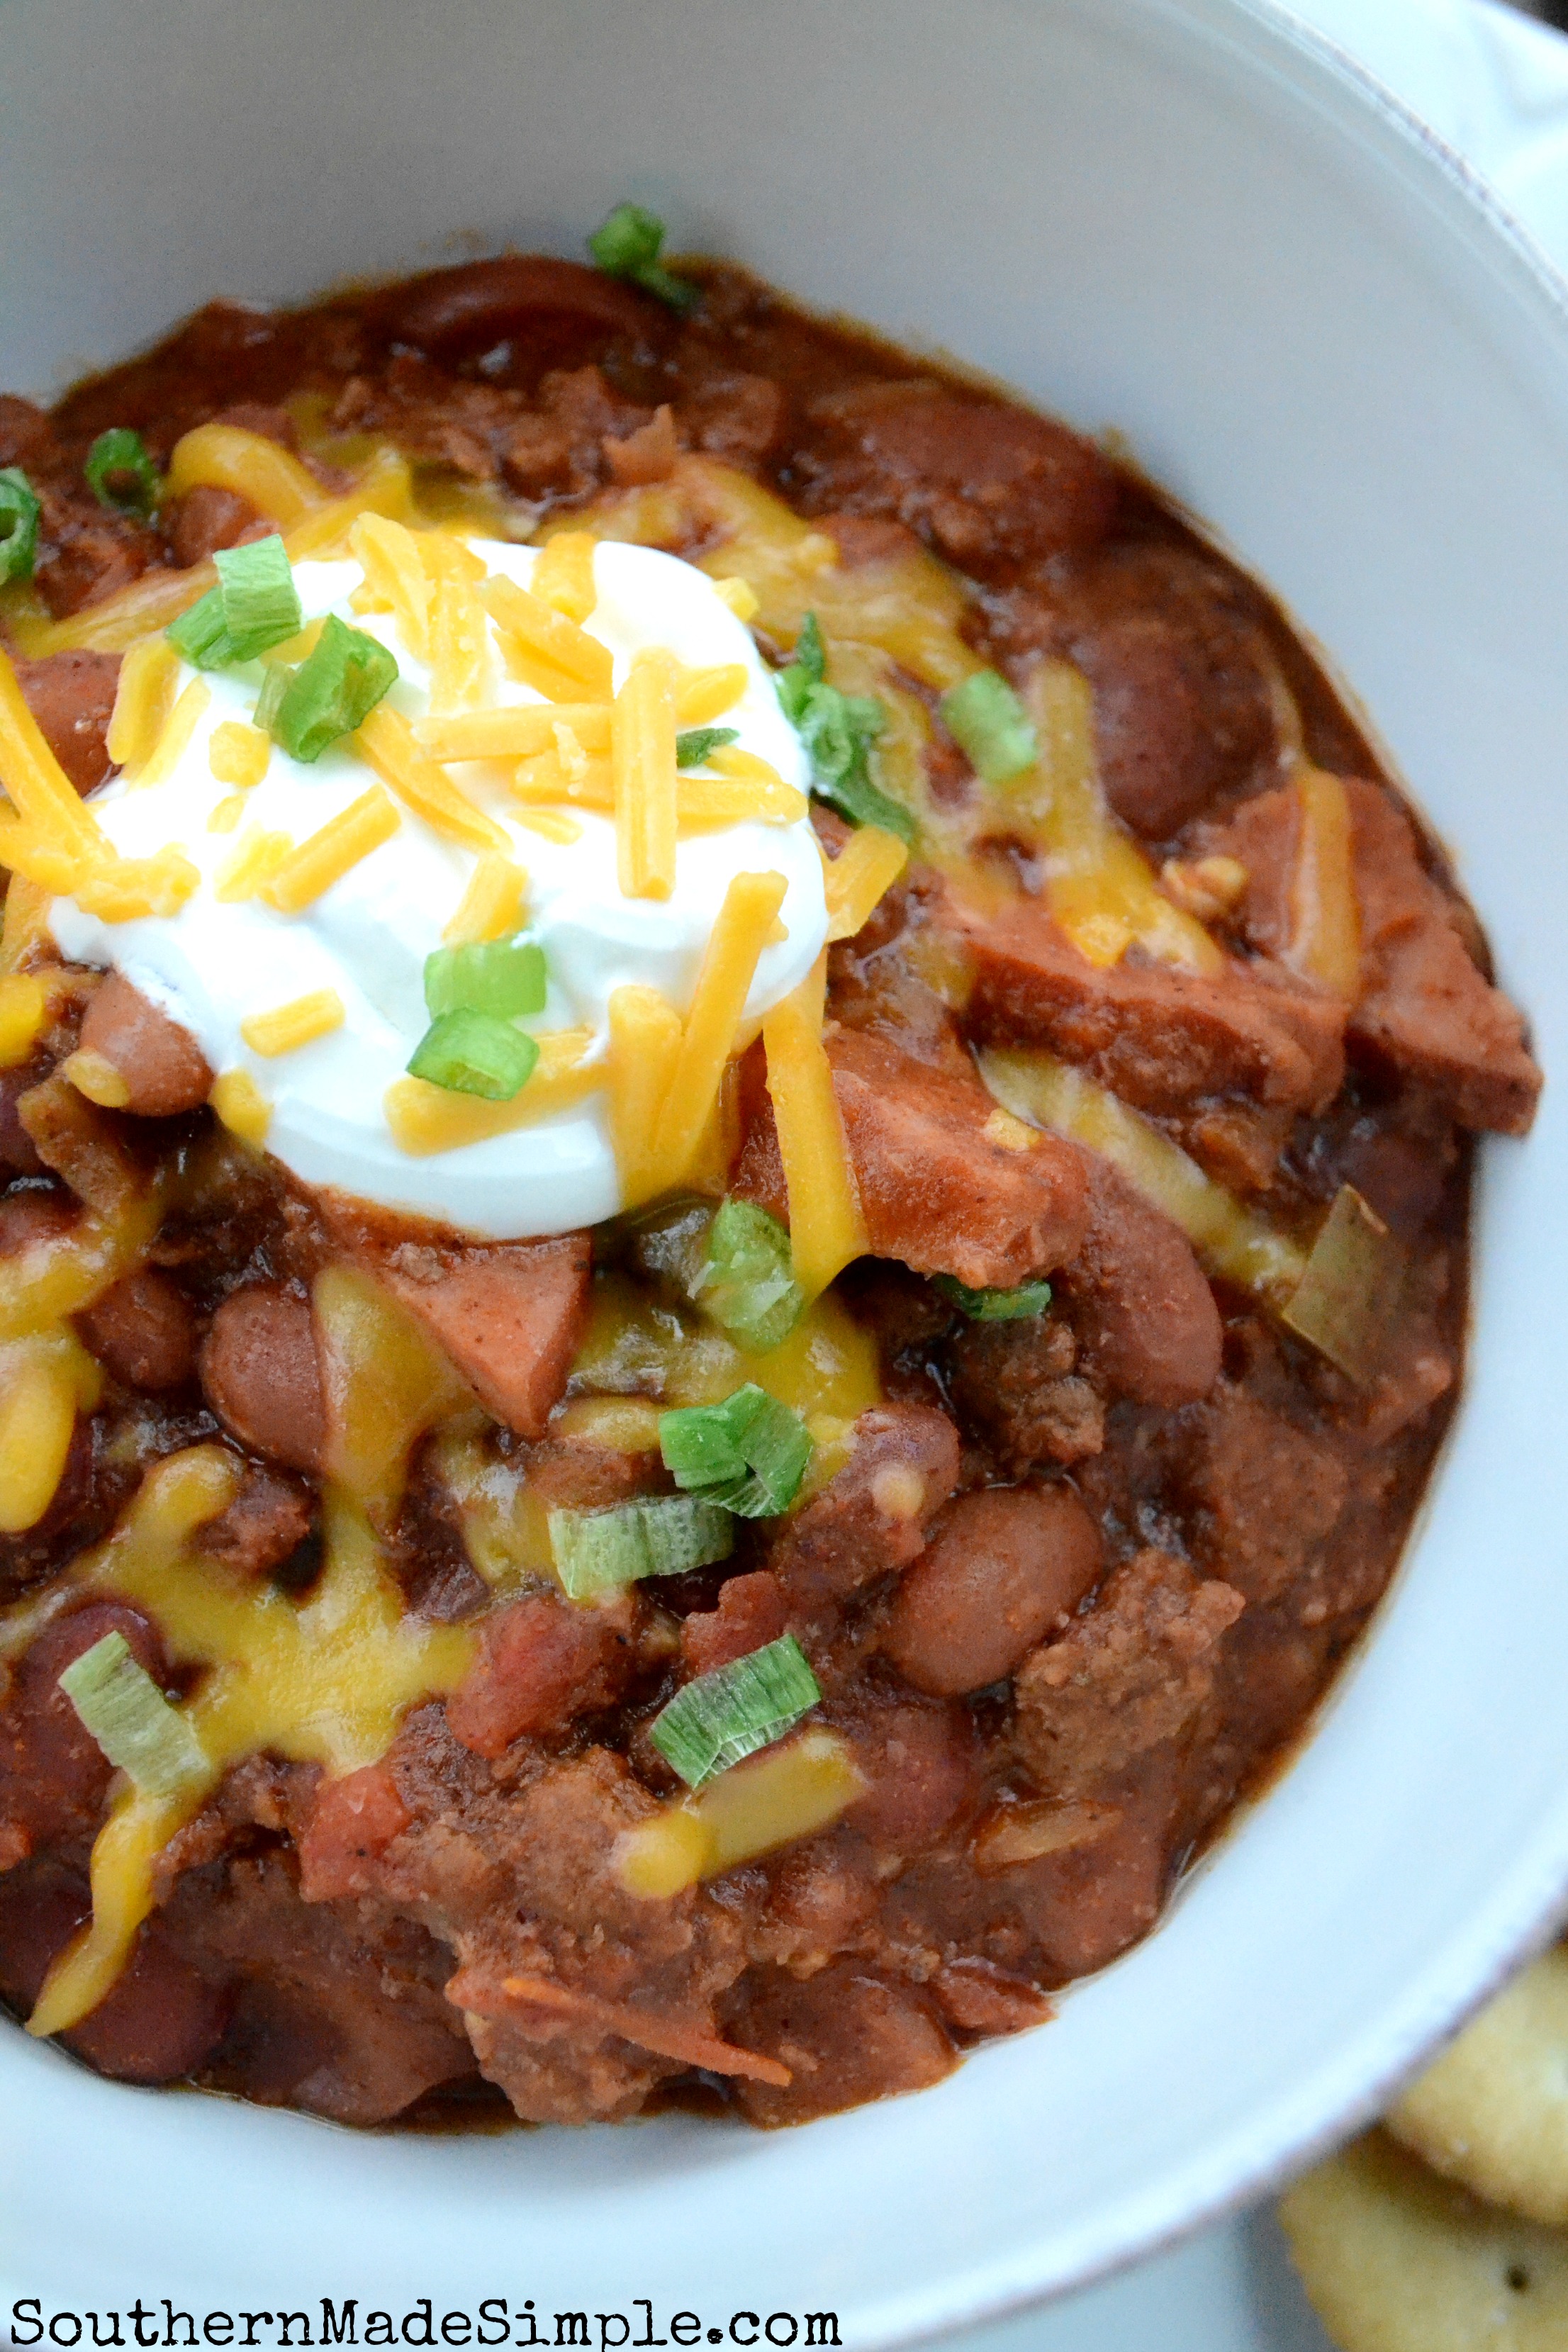 Venison Sausage Chili is the perfect dish to warm you up on a cold winter night. It's so easy to make, and it's packed with delicious flavor!